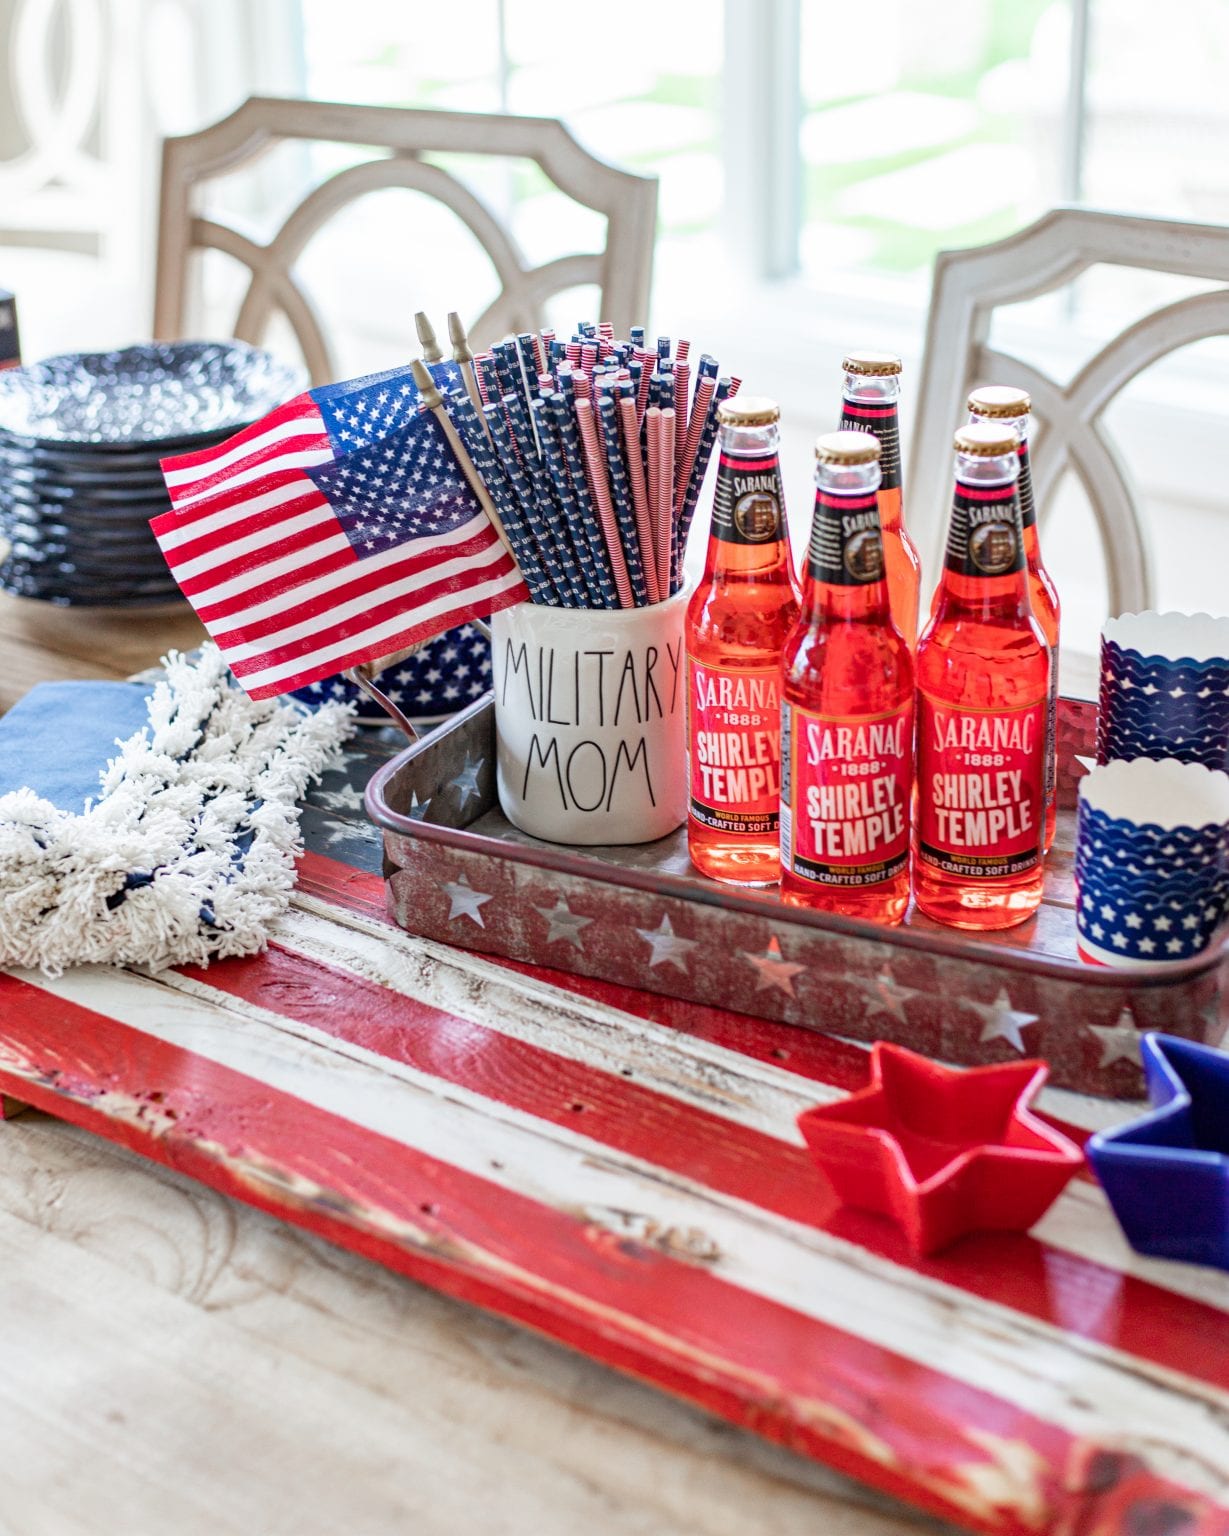 Fourth Of July Tablescape Ideas July Fourth Party Decor